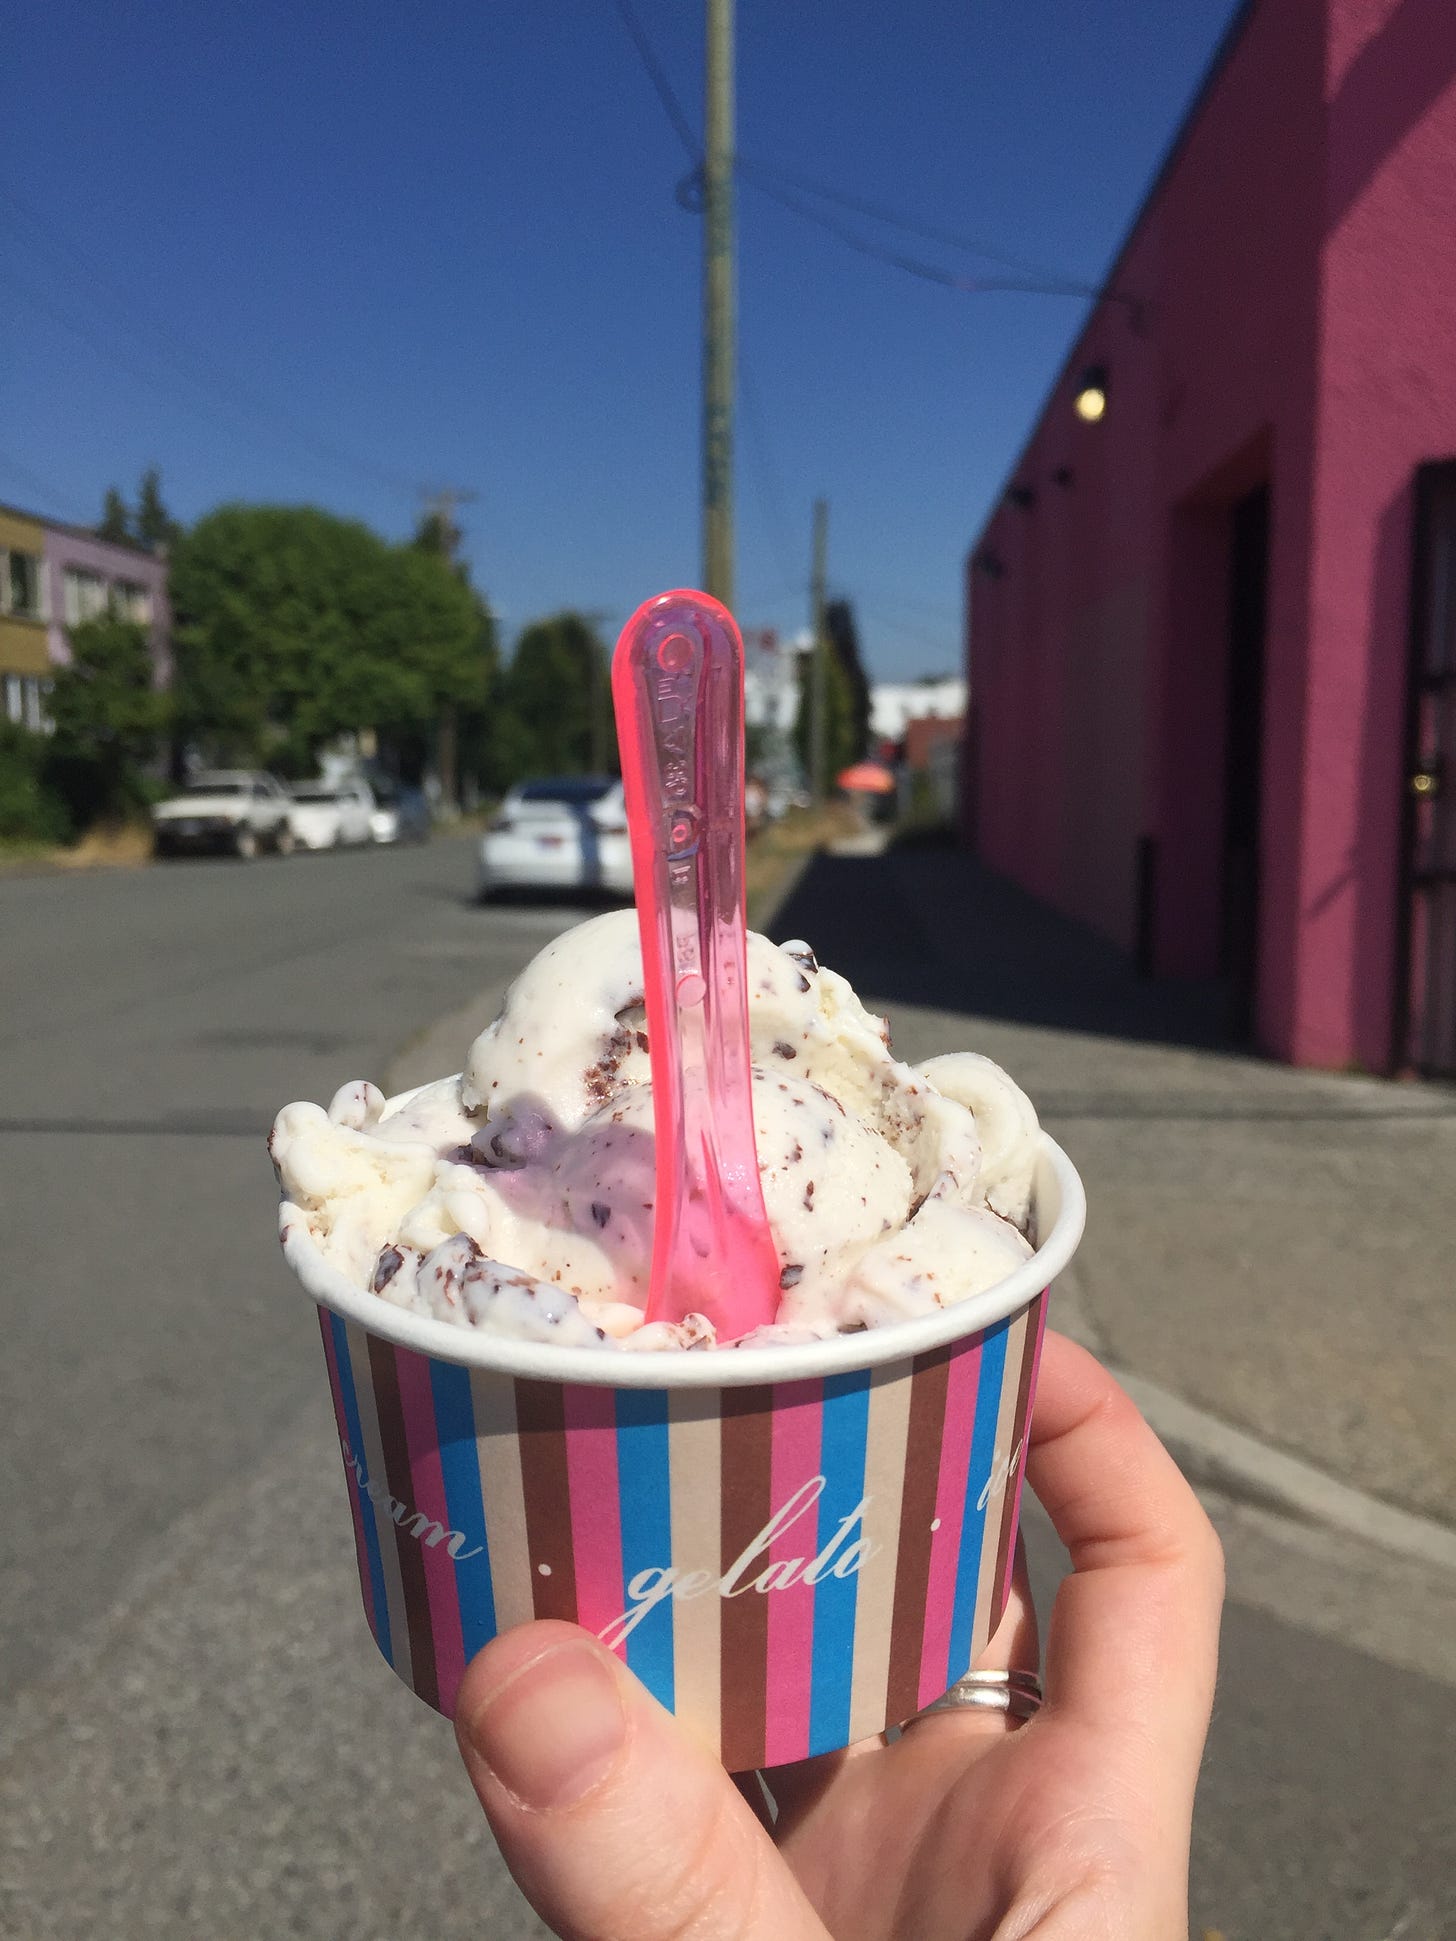 My hand holding a striped paper cup of stracciatella gelato with a clear pink spoon sticking out of it. In the background is a quiet street lined with a few parked cars, and a hot pink building is on the right hand side of the street. The sky is bright blue.